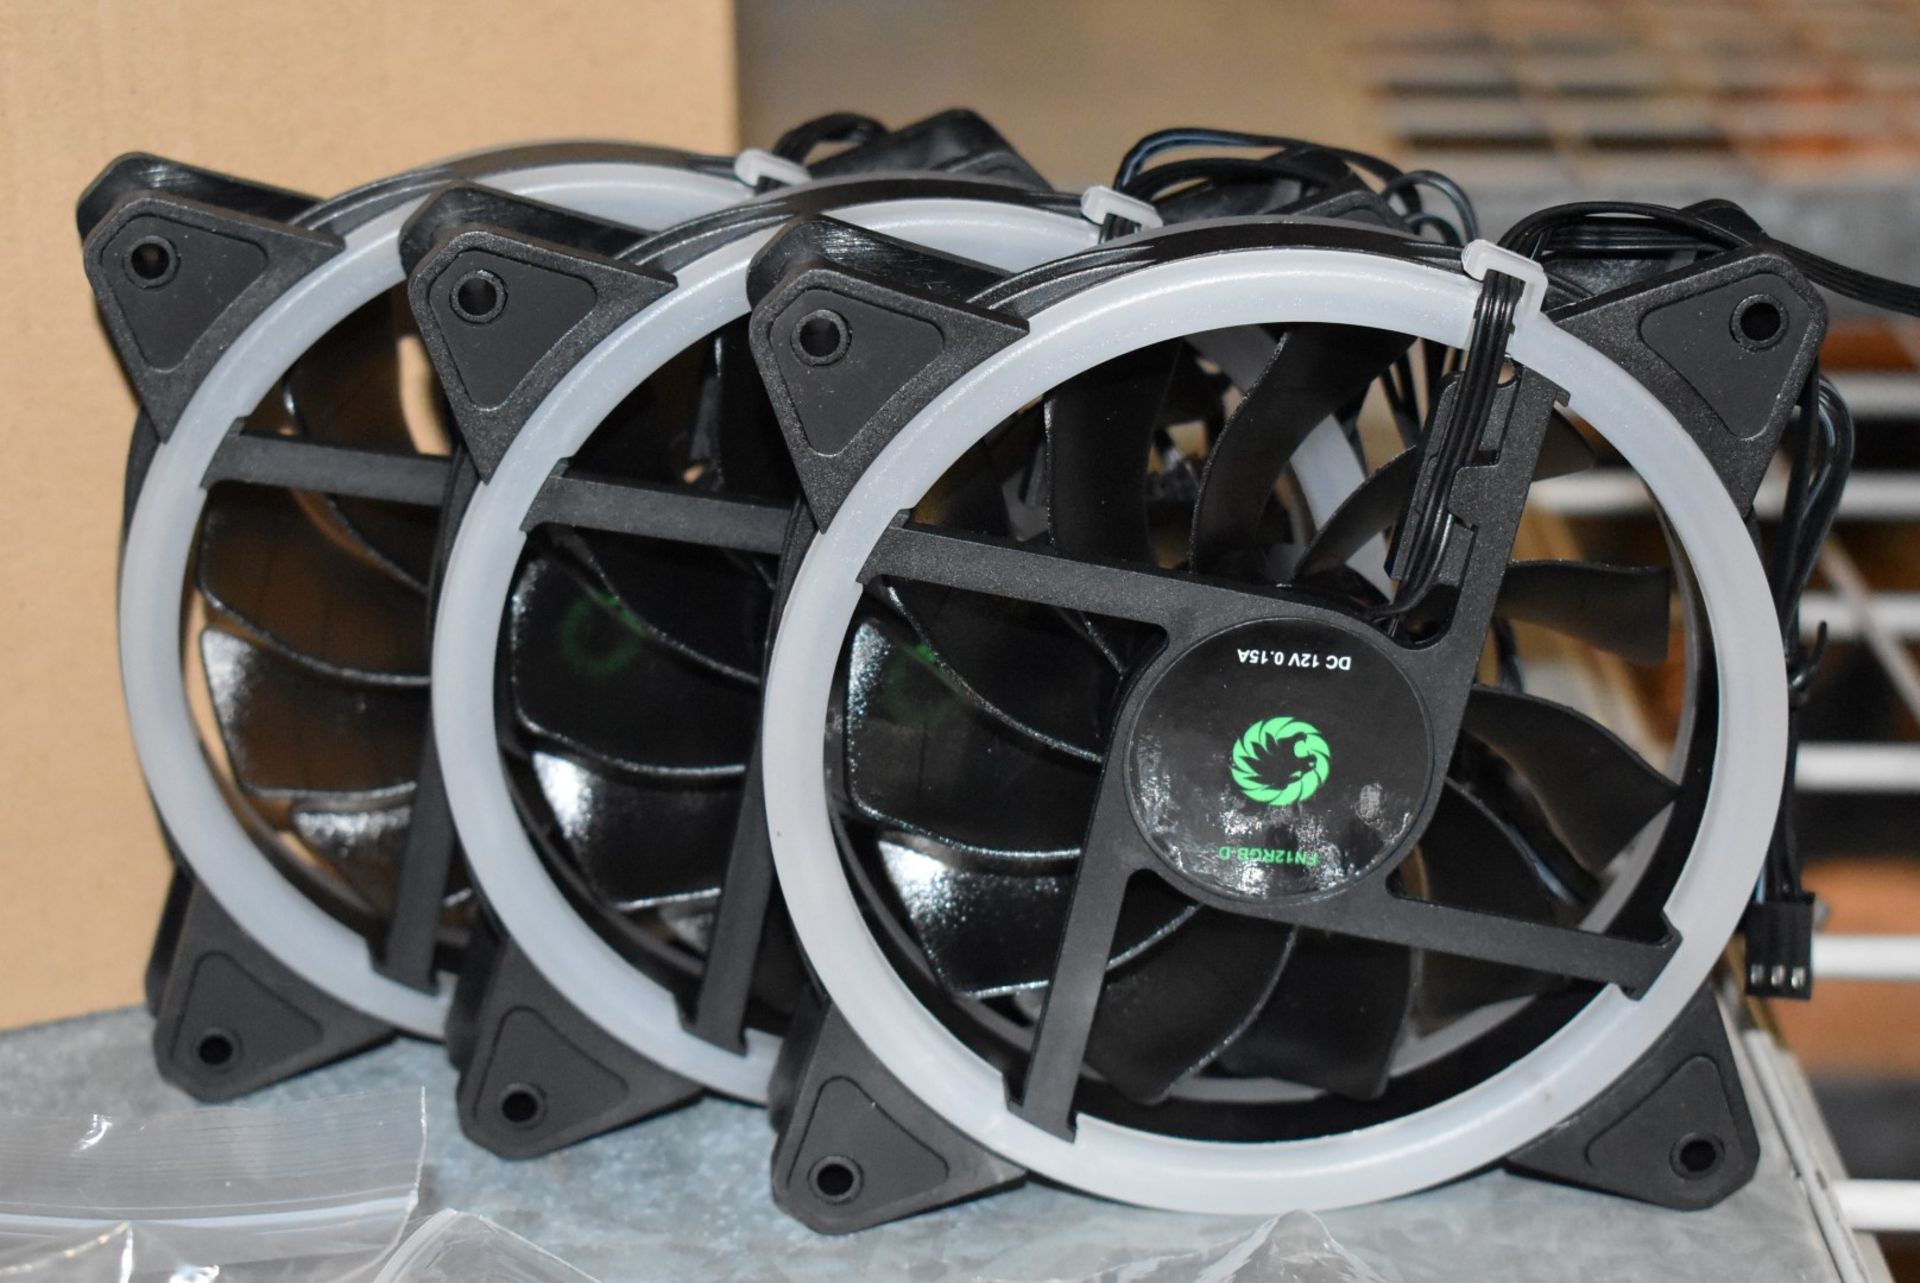 1 x GameMax LED Fan Pack For PC Gaming Cases - Includes 3 x 120mm LED Case Fans, Mounting Screws - Image 2 of 8